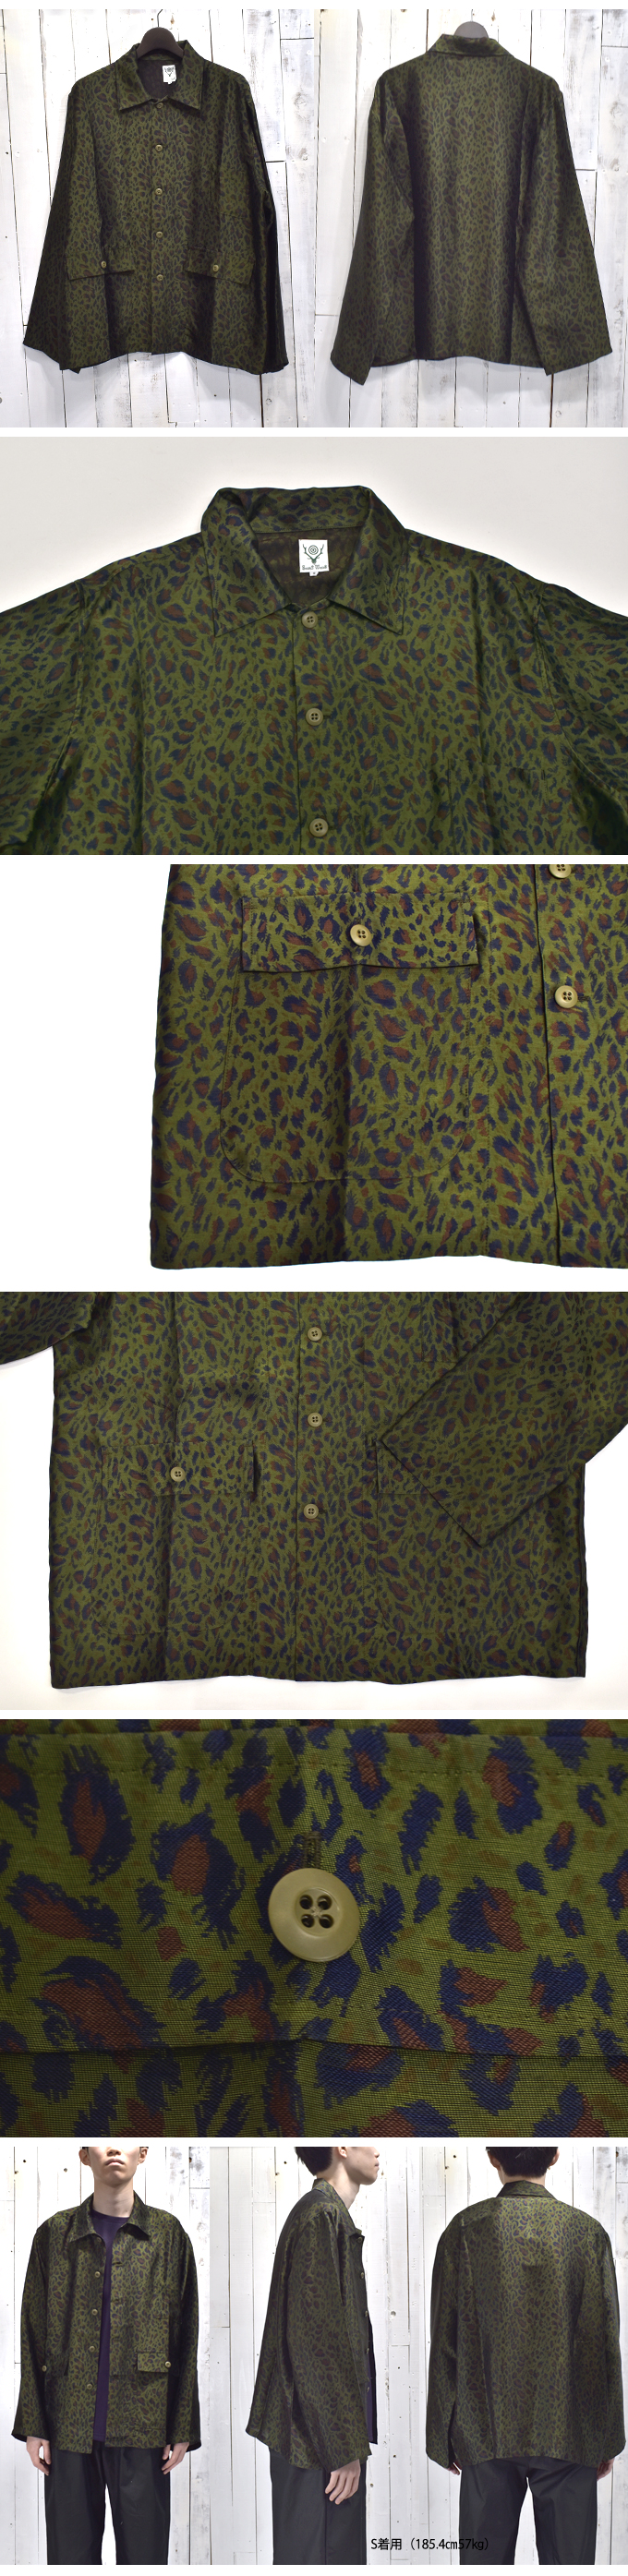 South2 West8 Hunting Shirt Leopard